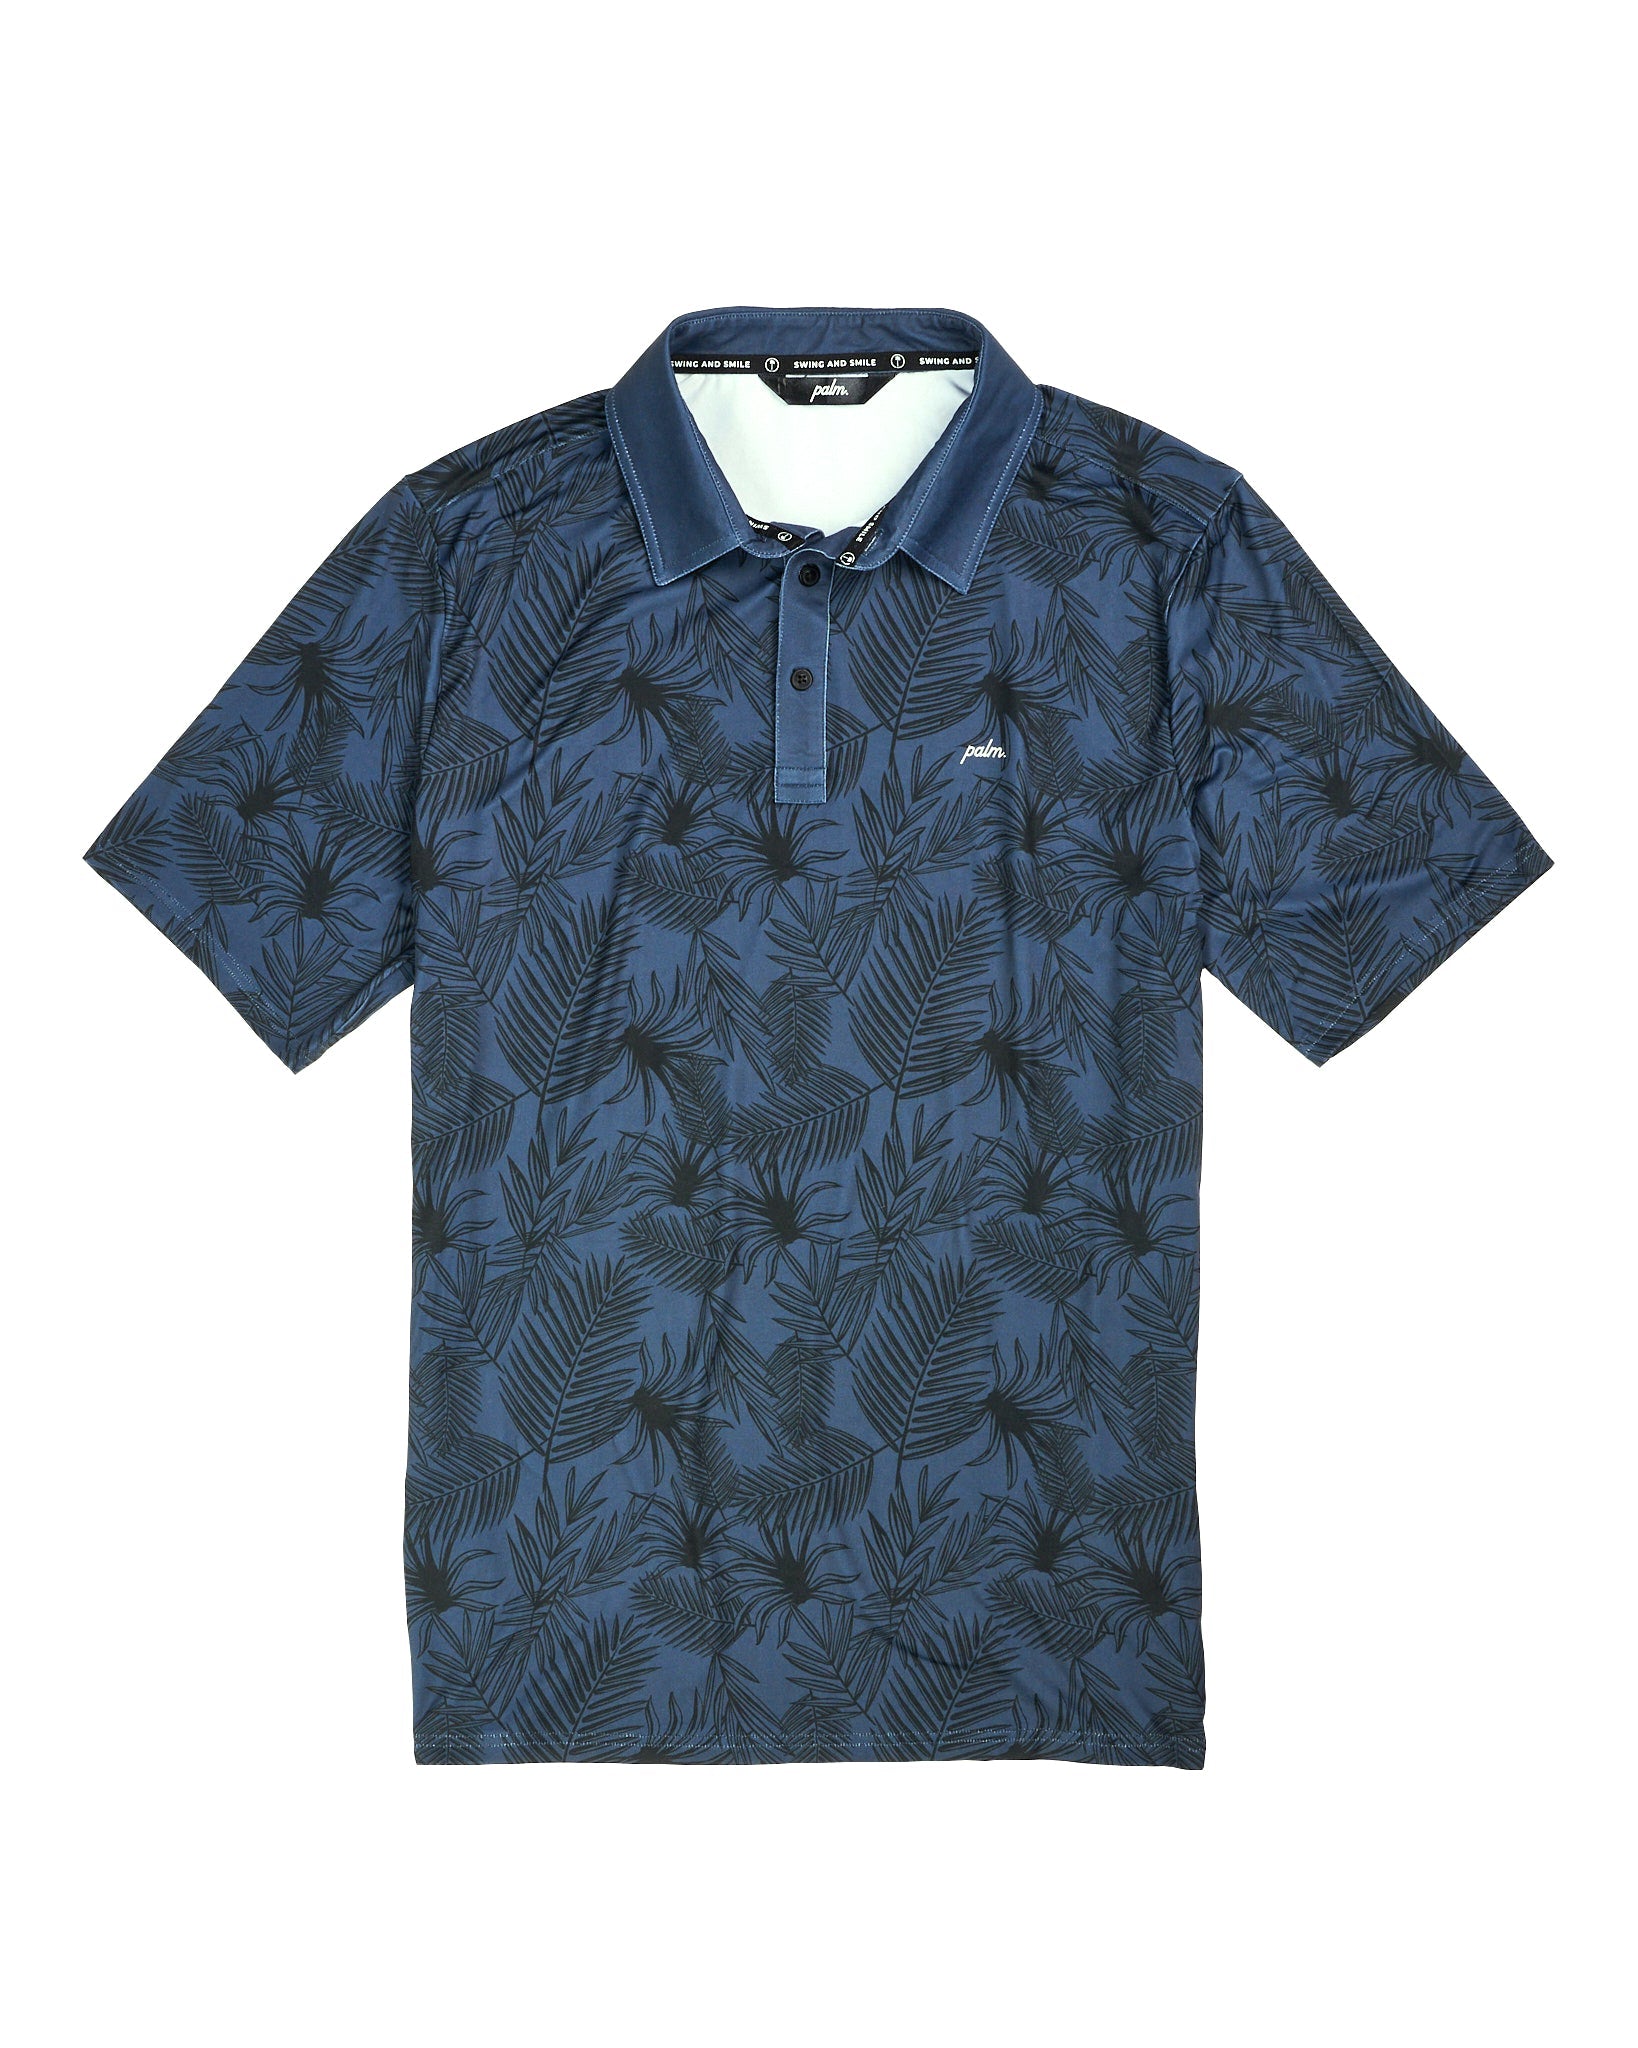 Palm Golf Co. Overlook Performance Polo